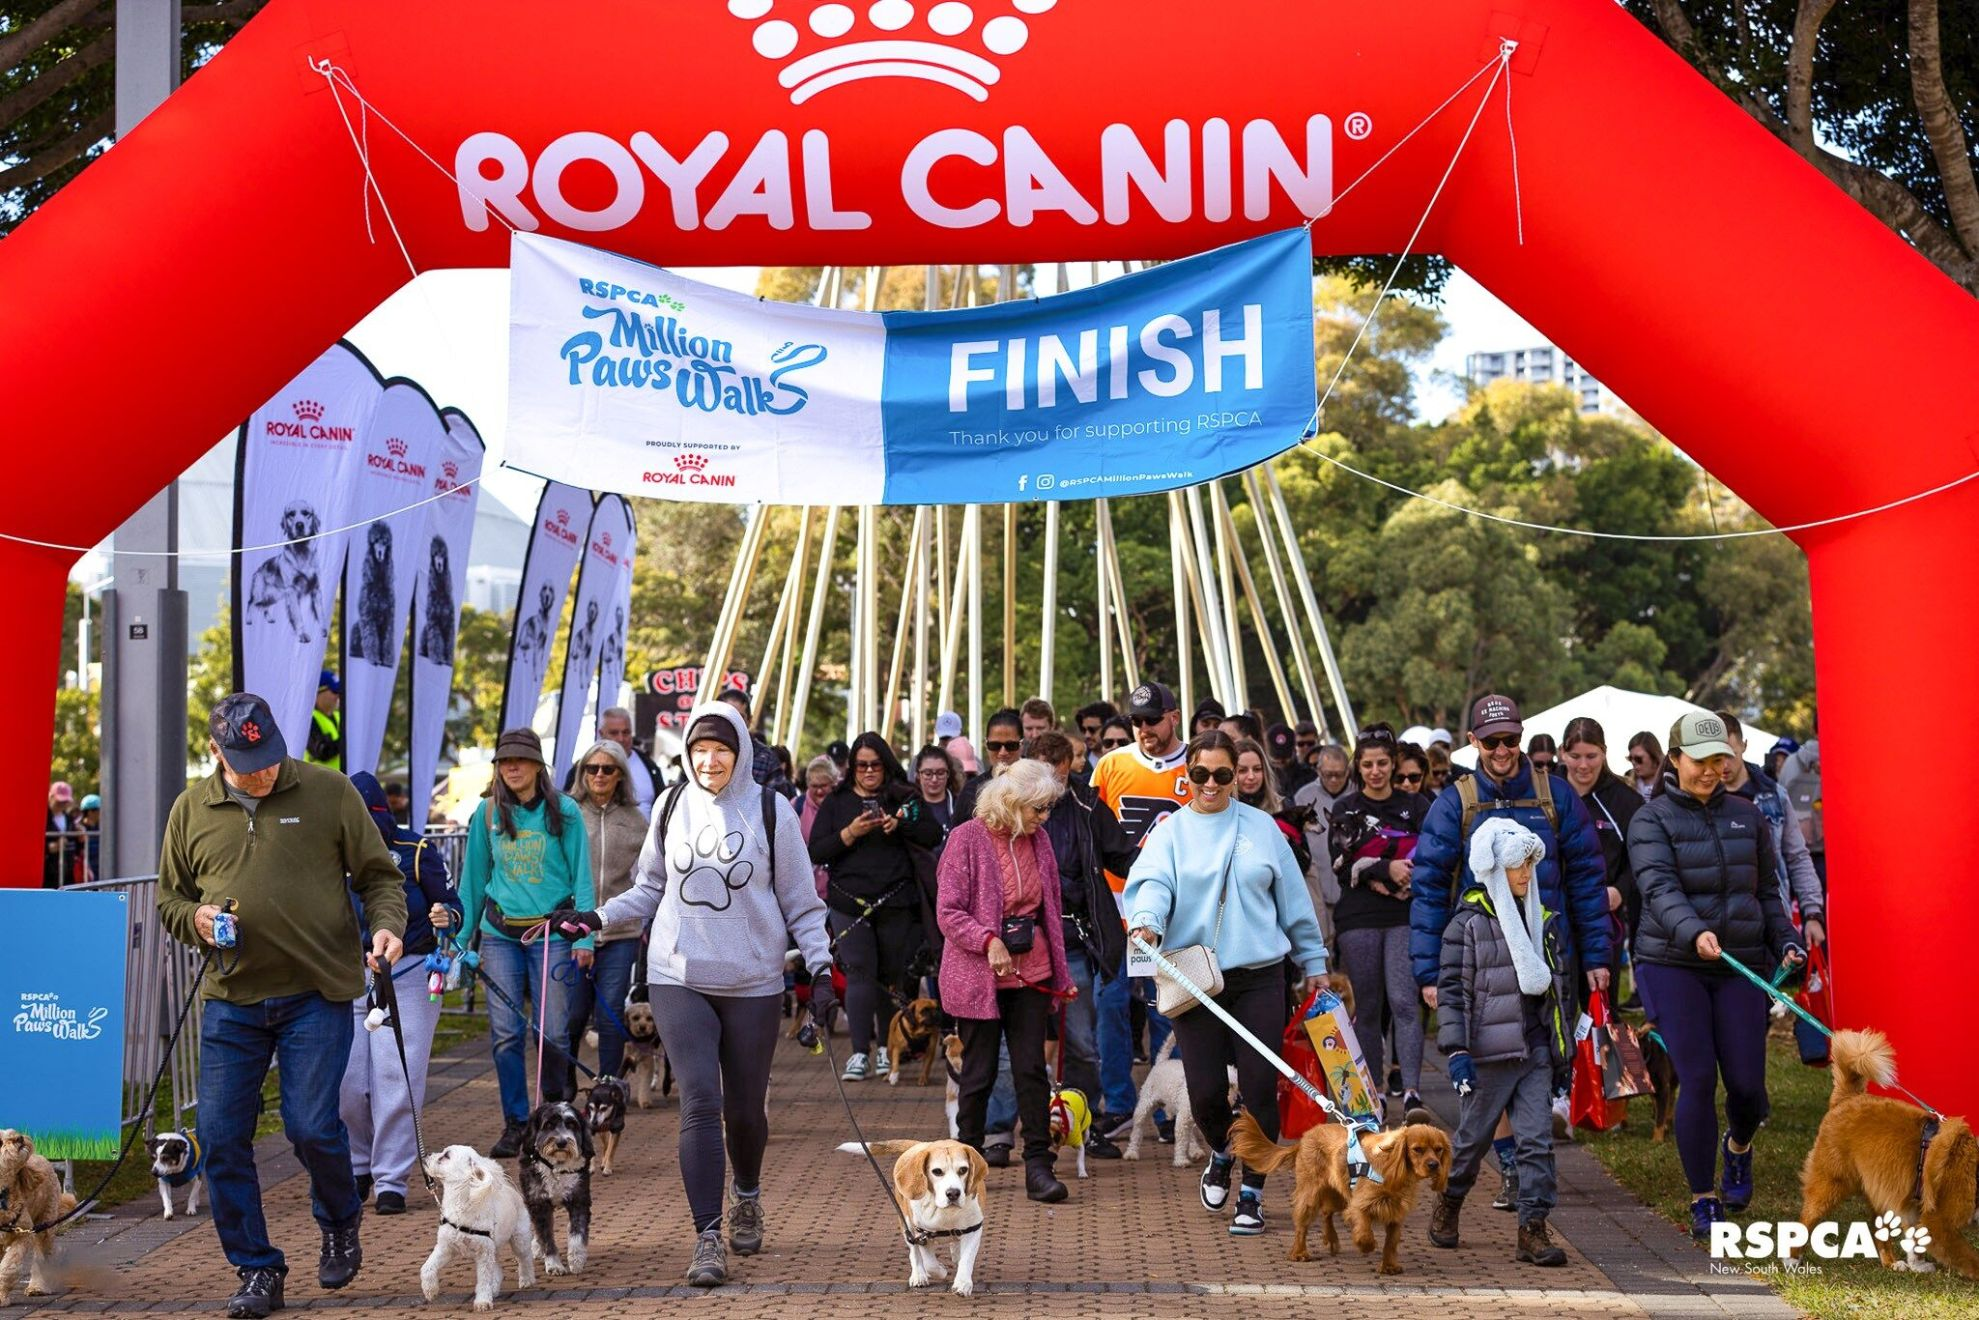 Attendees cross finish line at RSPCA Million Paws Walk